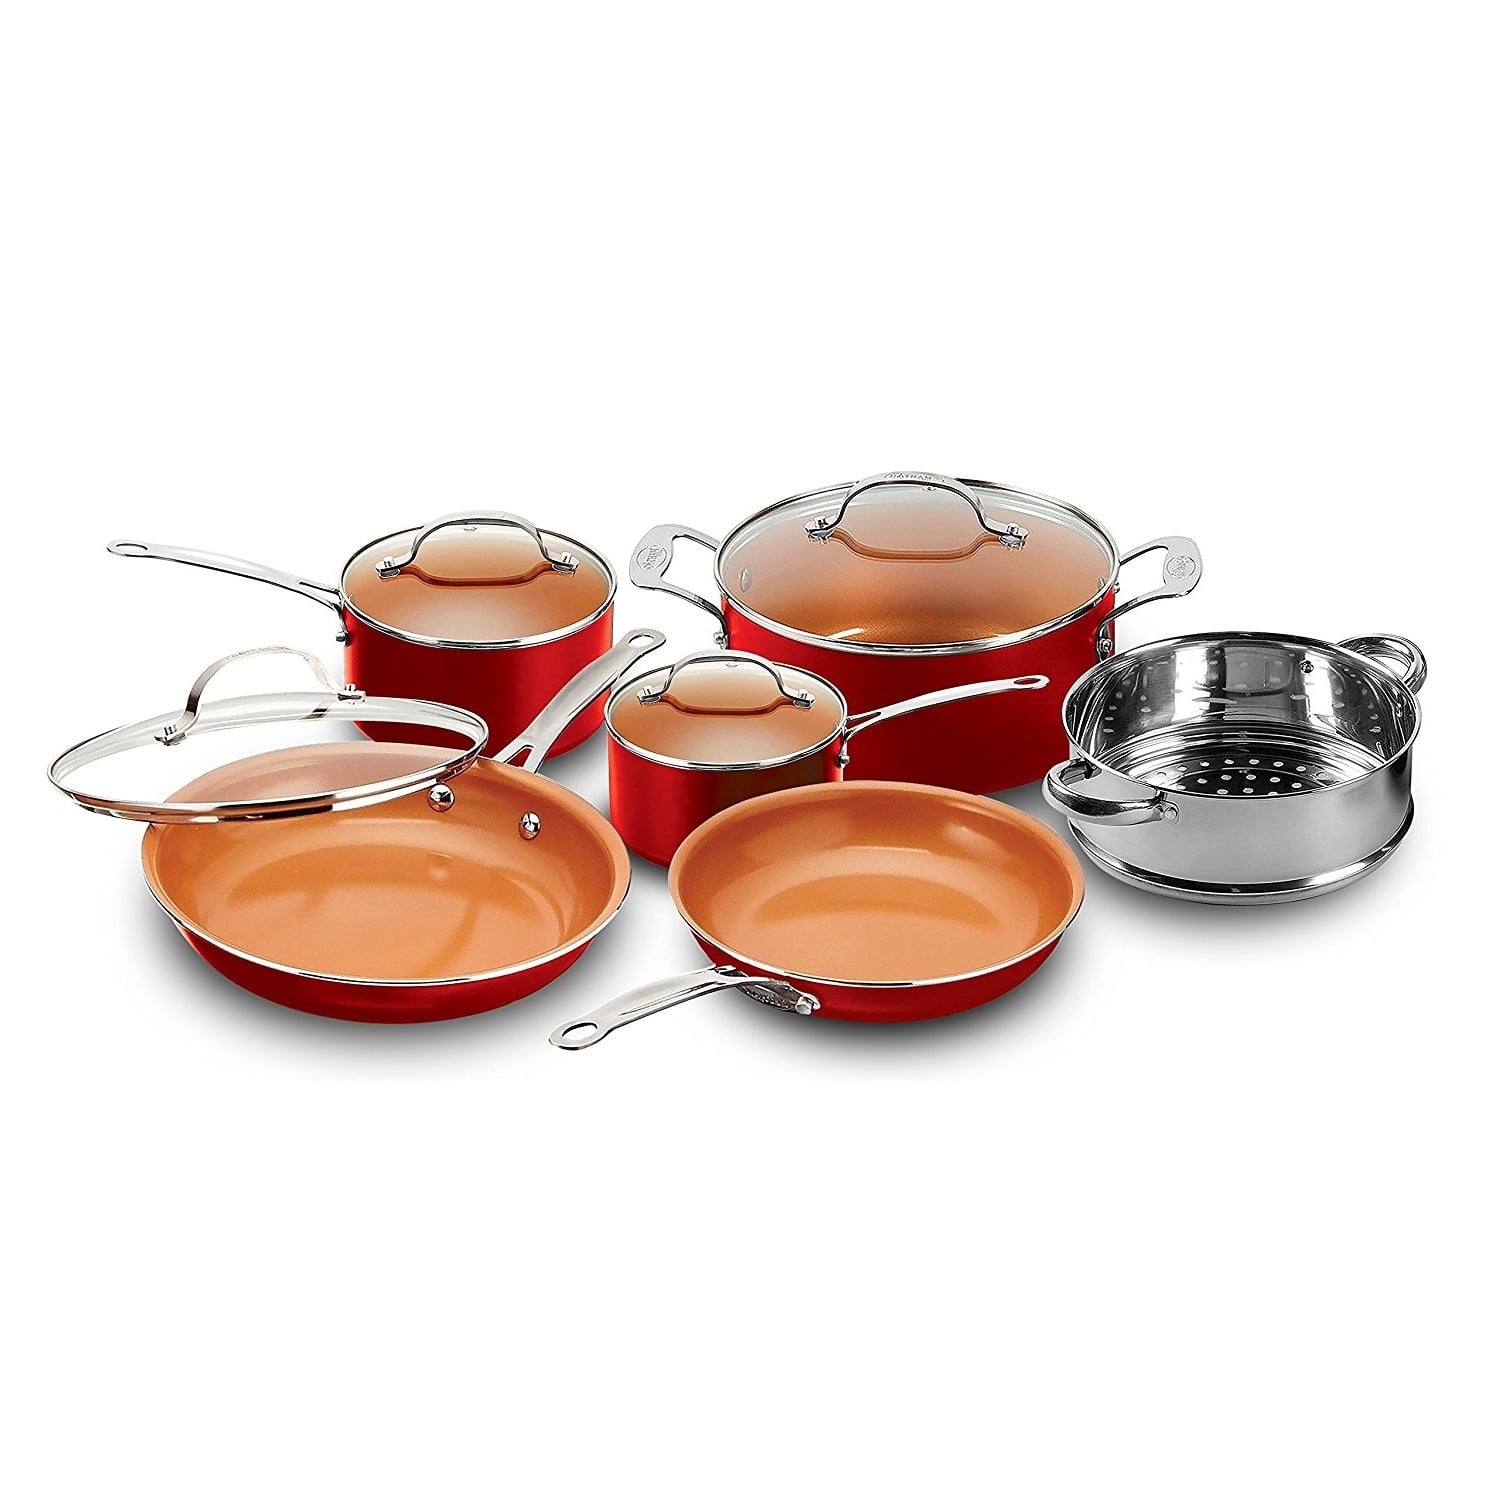 Gotham Steel Copper Pots and Pans Set, 10 Piece Nonstick Cookware set with  Titanium Copper and Ceramic Coating, Dishwasher Safe and Oven Safe -  Walmart.com